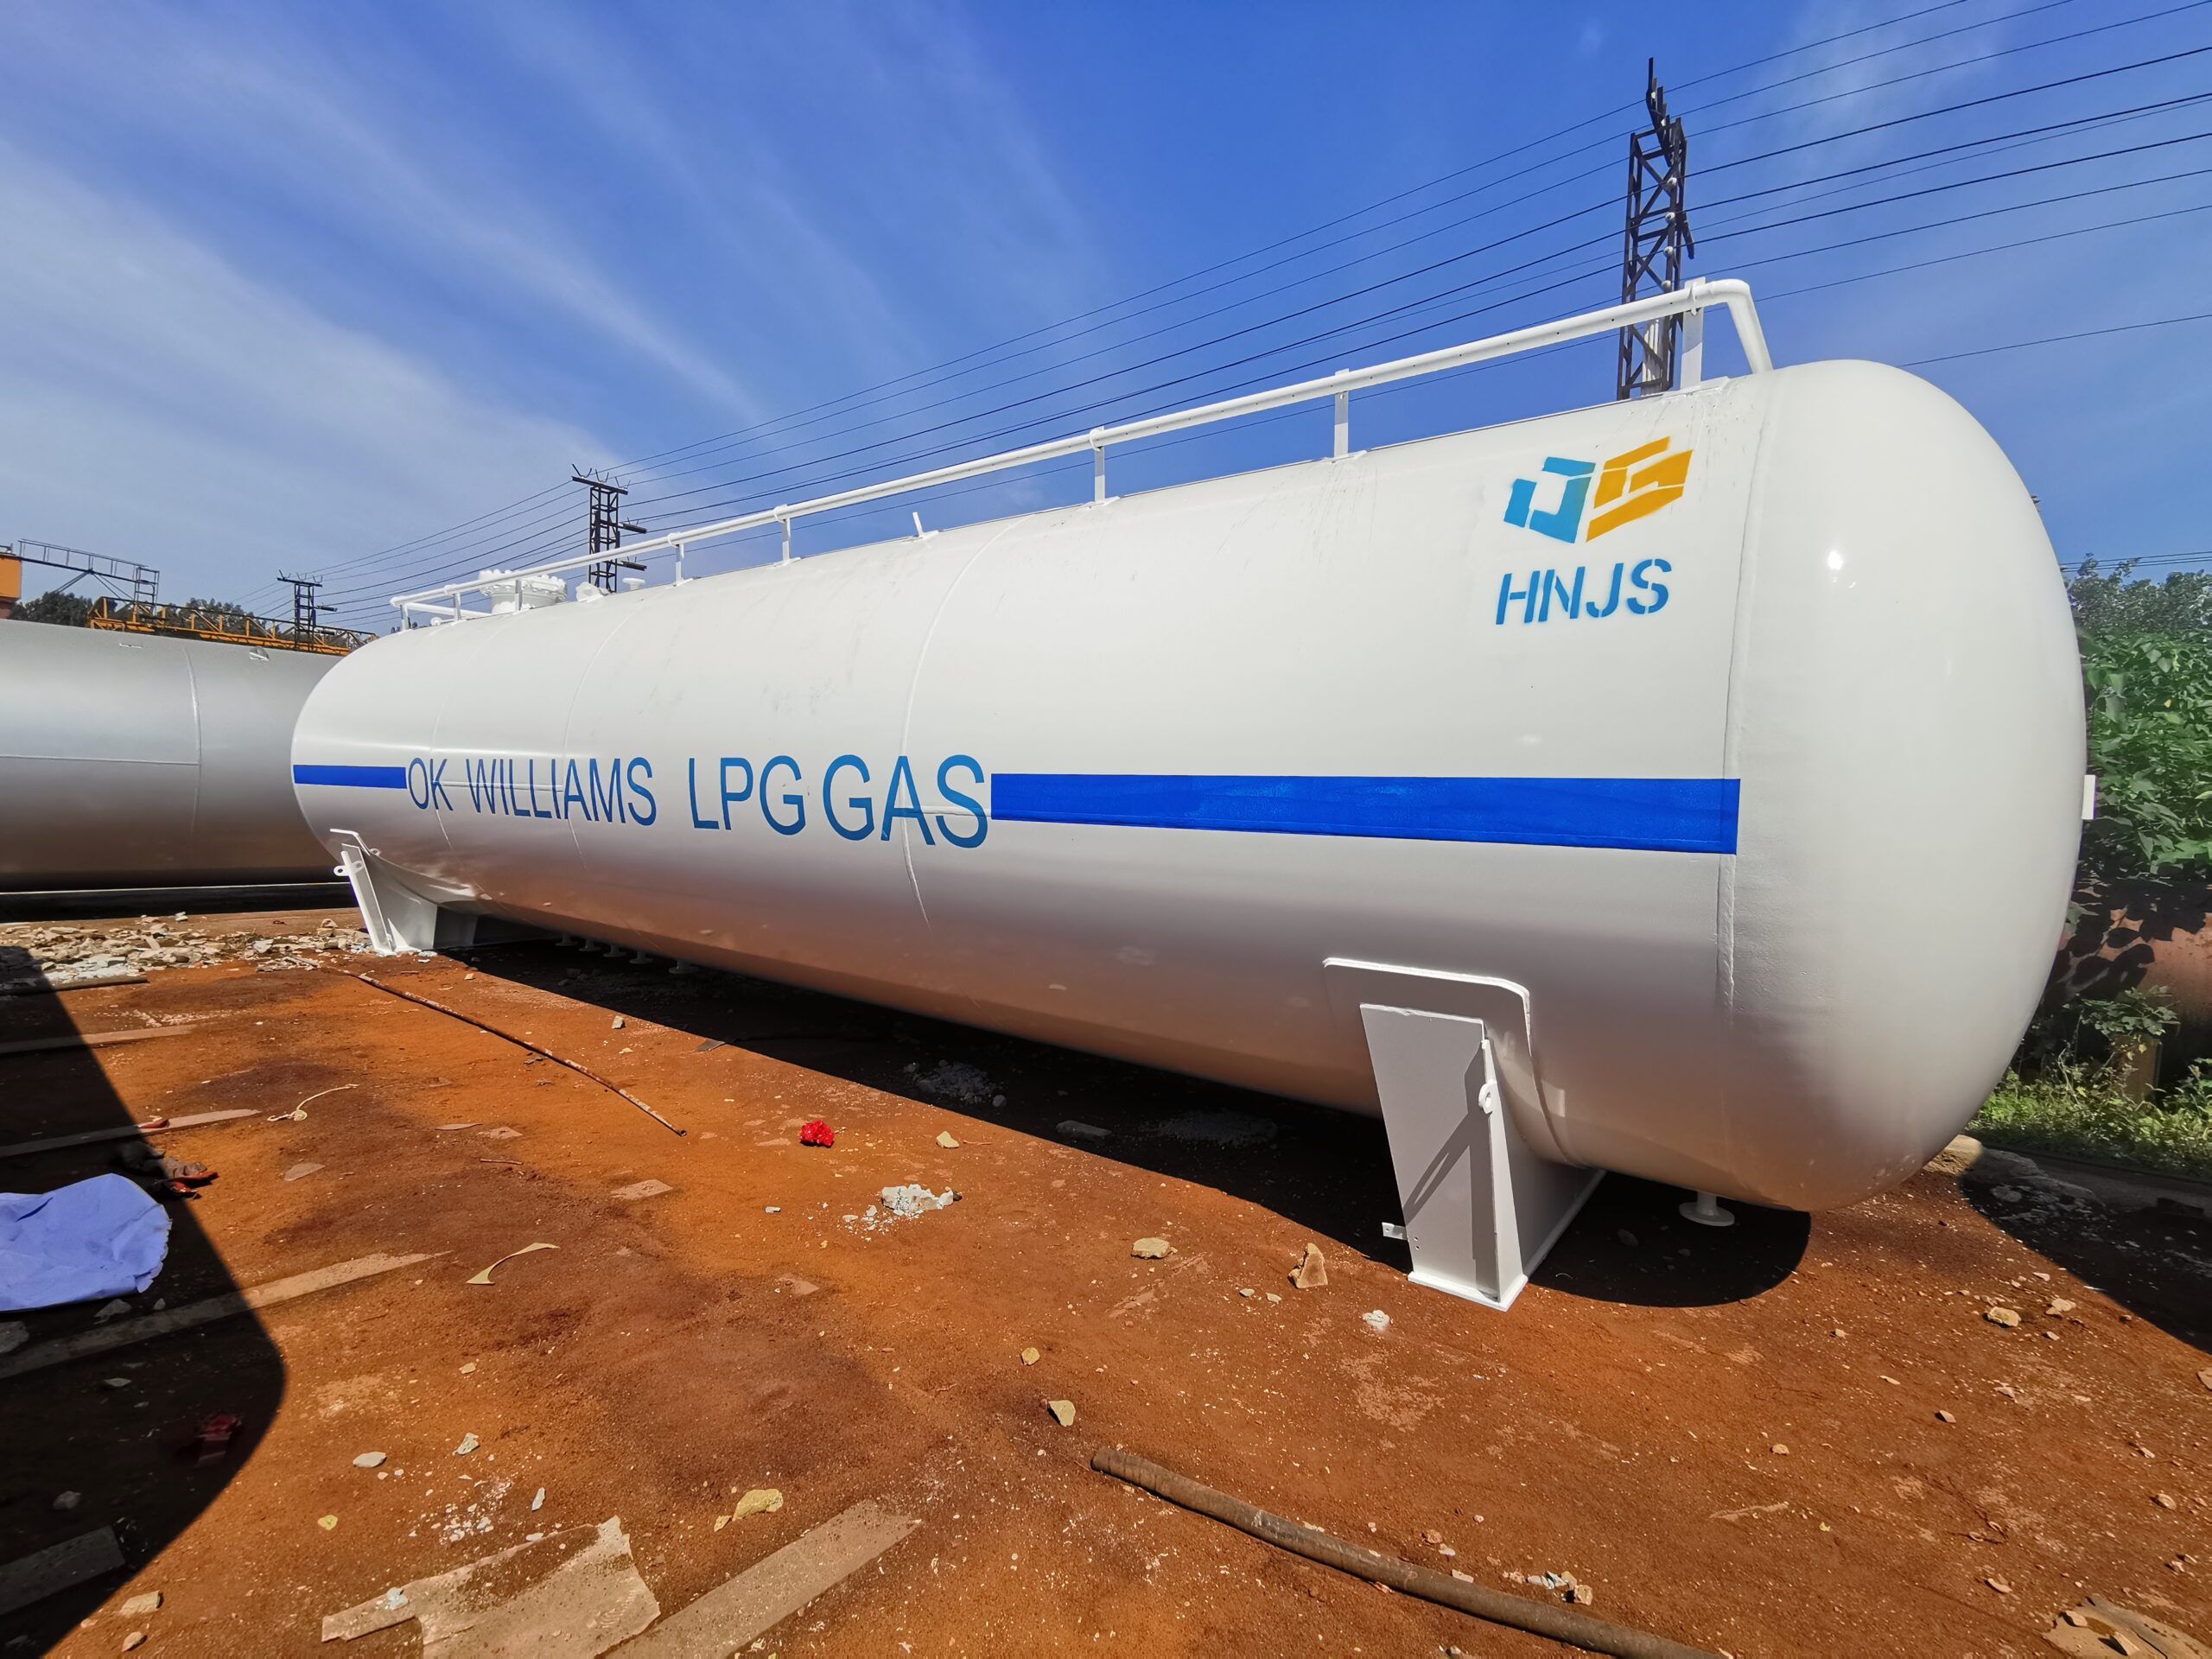 Liquefied gas storage tank is a product for storing liquefied petroleum gas